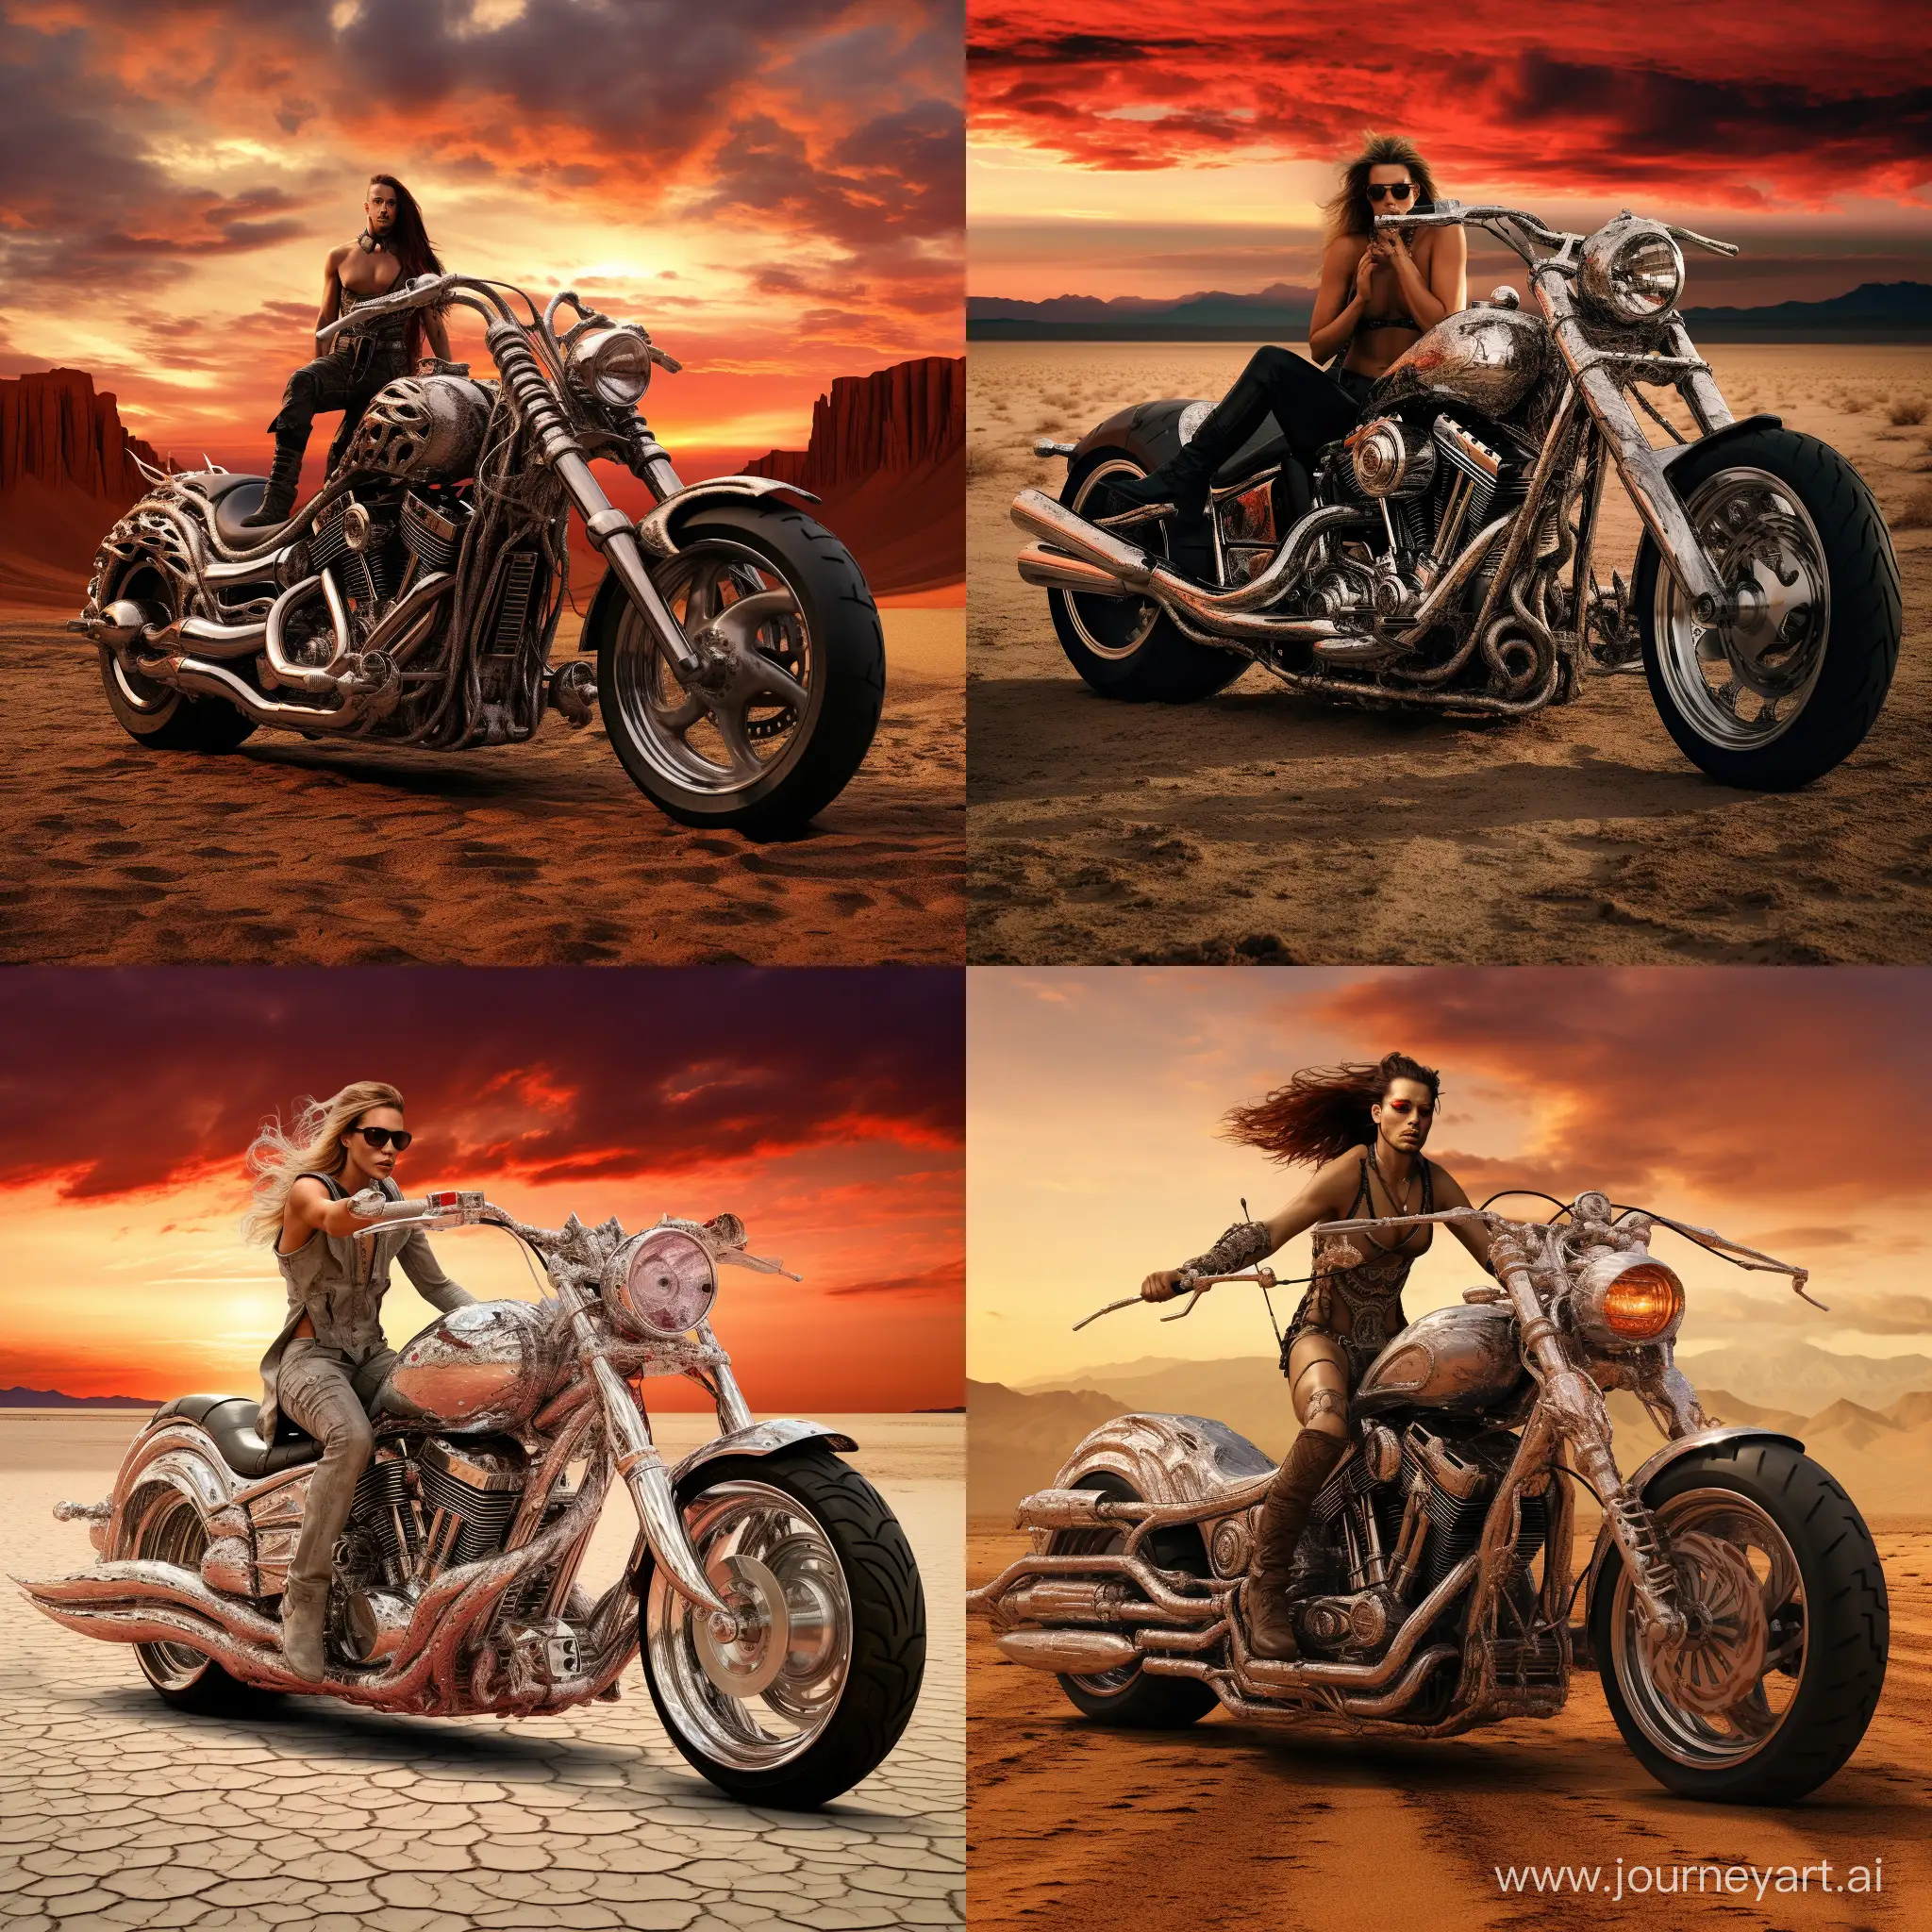 Fiery-Demon-Riding-a-Chrome-LowRider-Motorcycle-in-Stormy-Desert-Sky